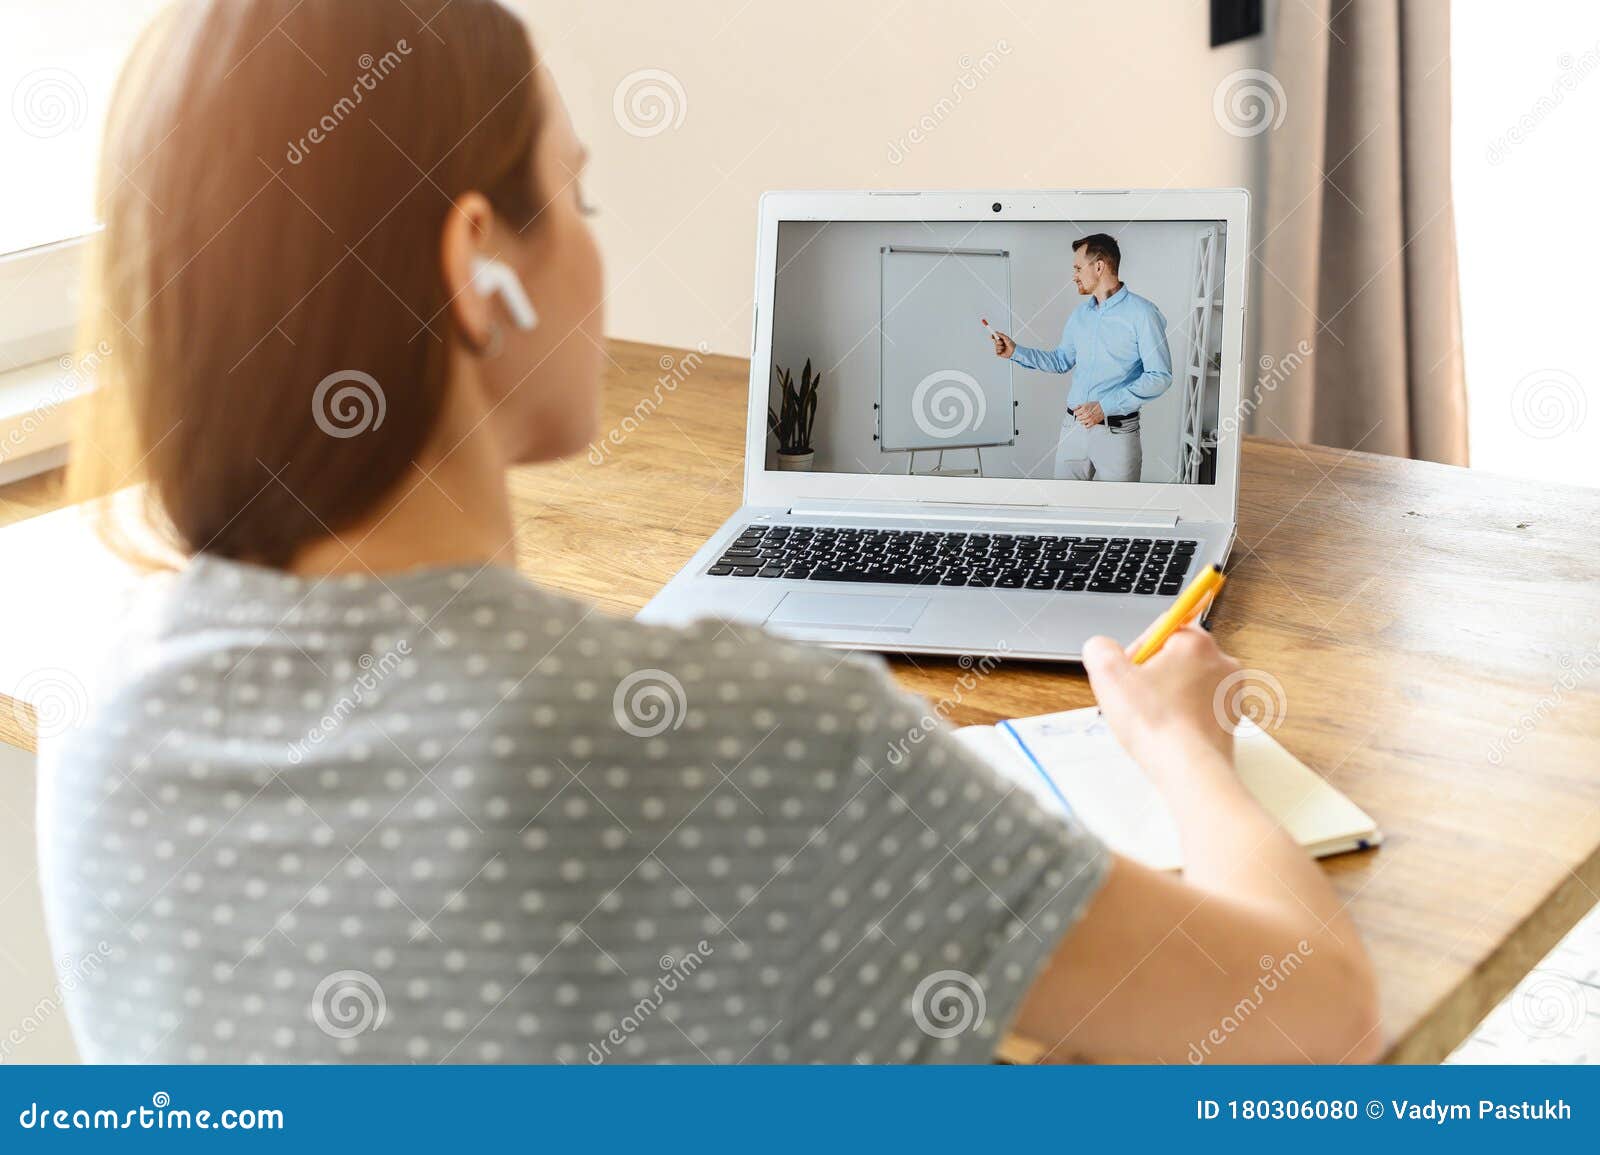 a young woman watching online classes at home